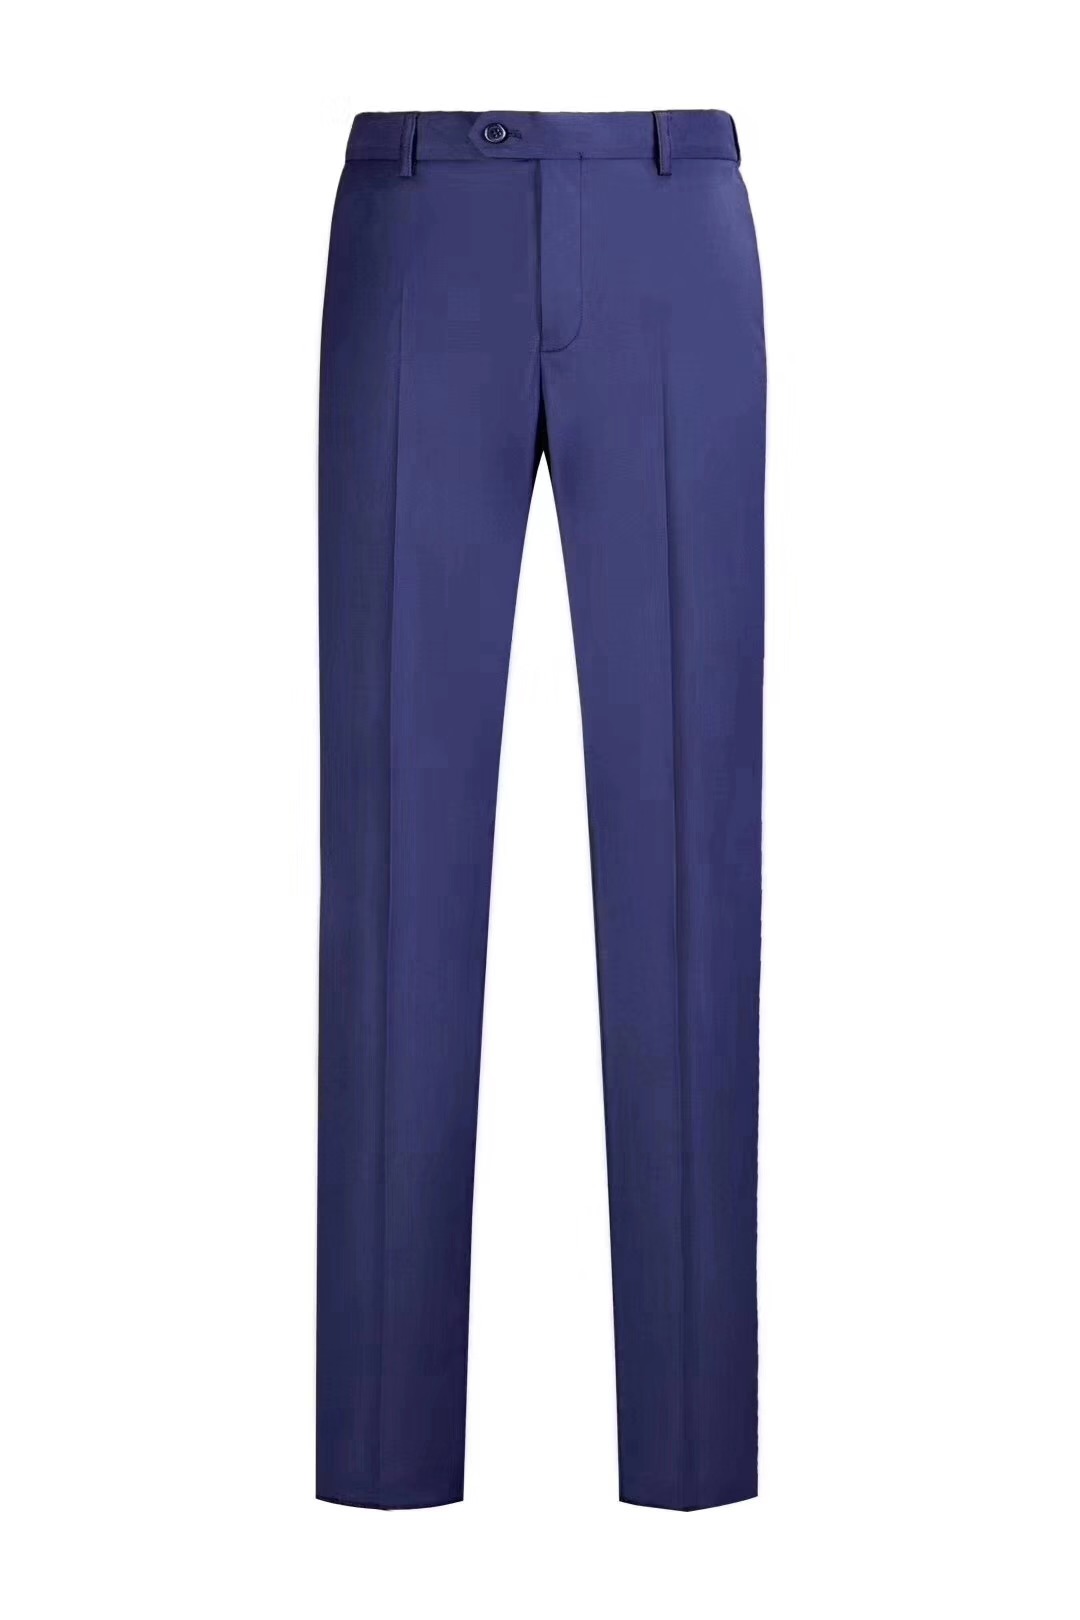 Western-style trousers